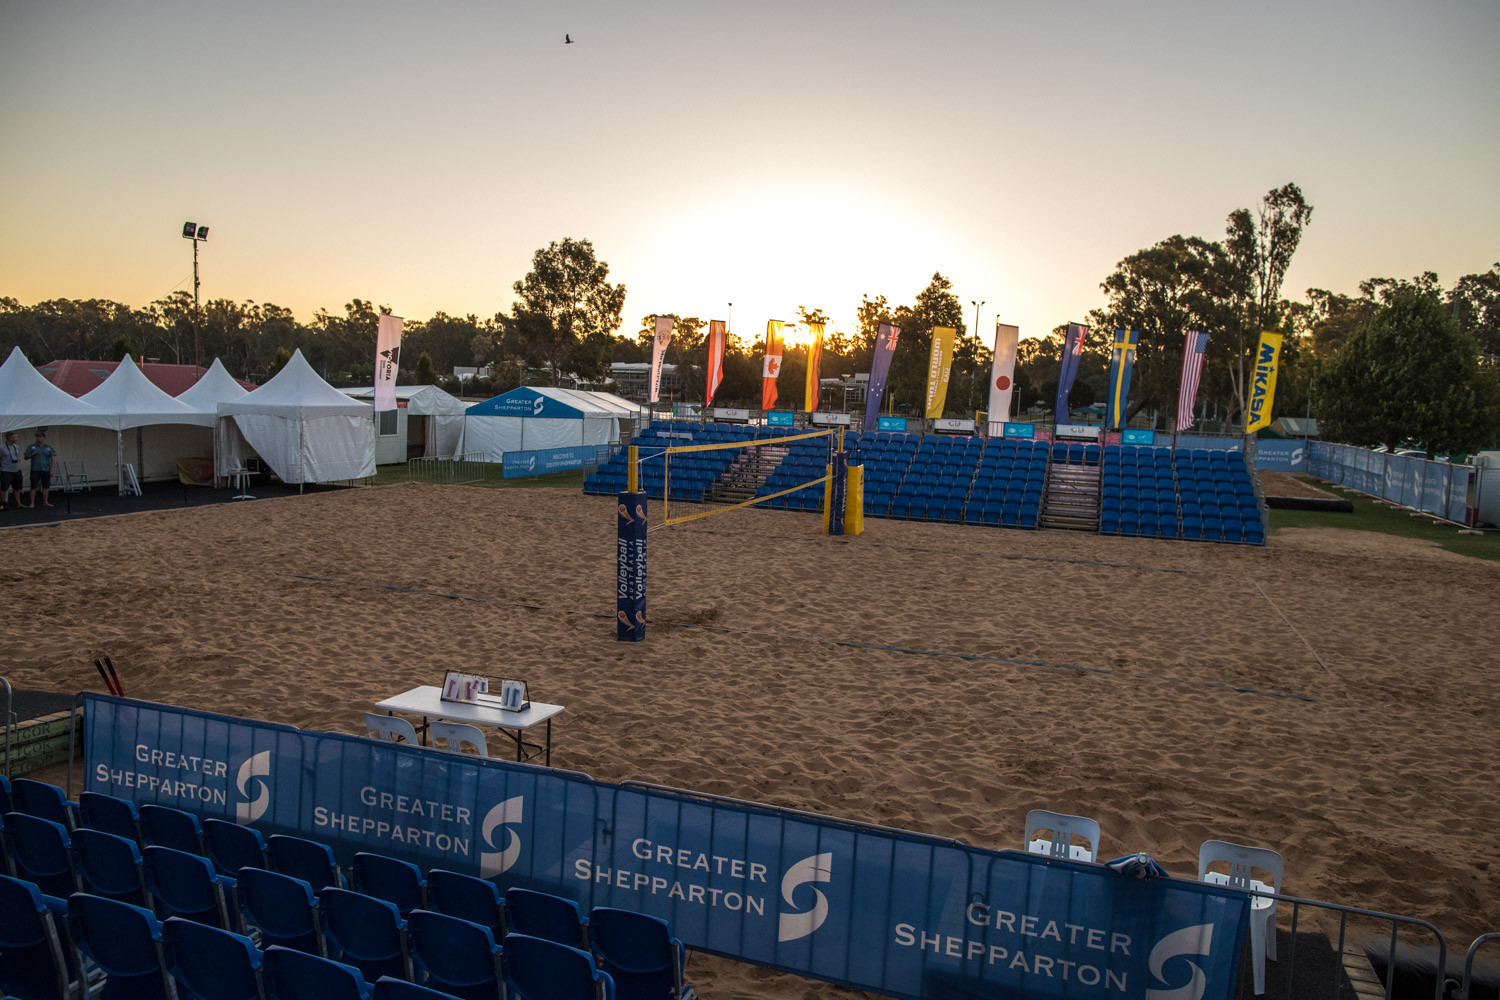 The competition in Shepparton will be a testing ground for the new block touch rule ©FIVB